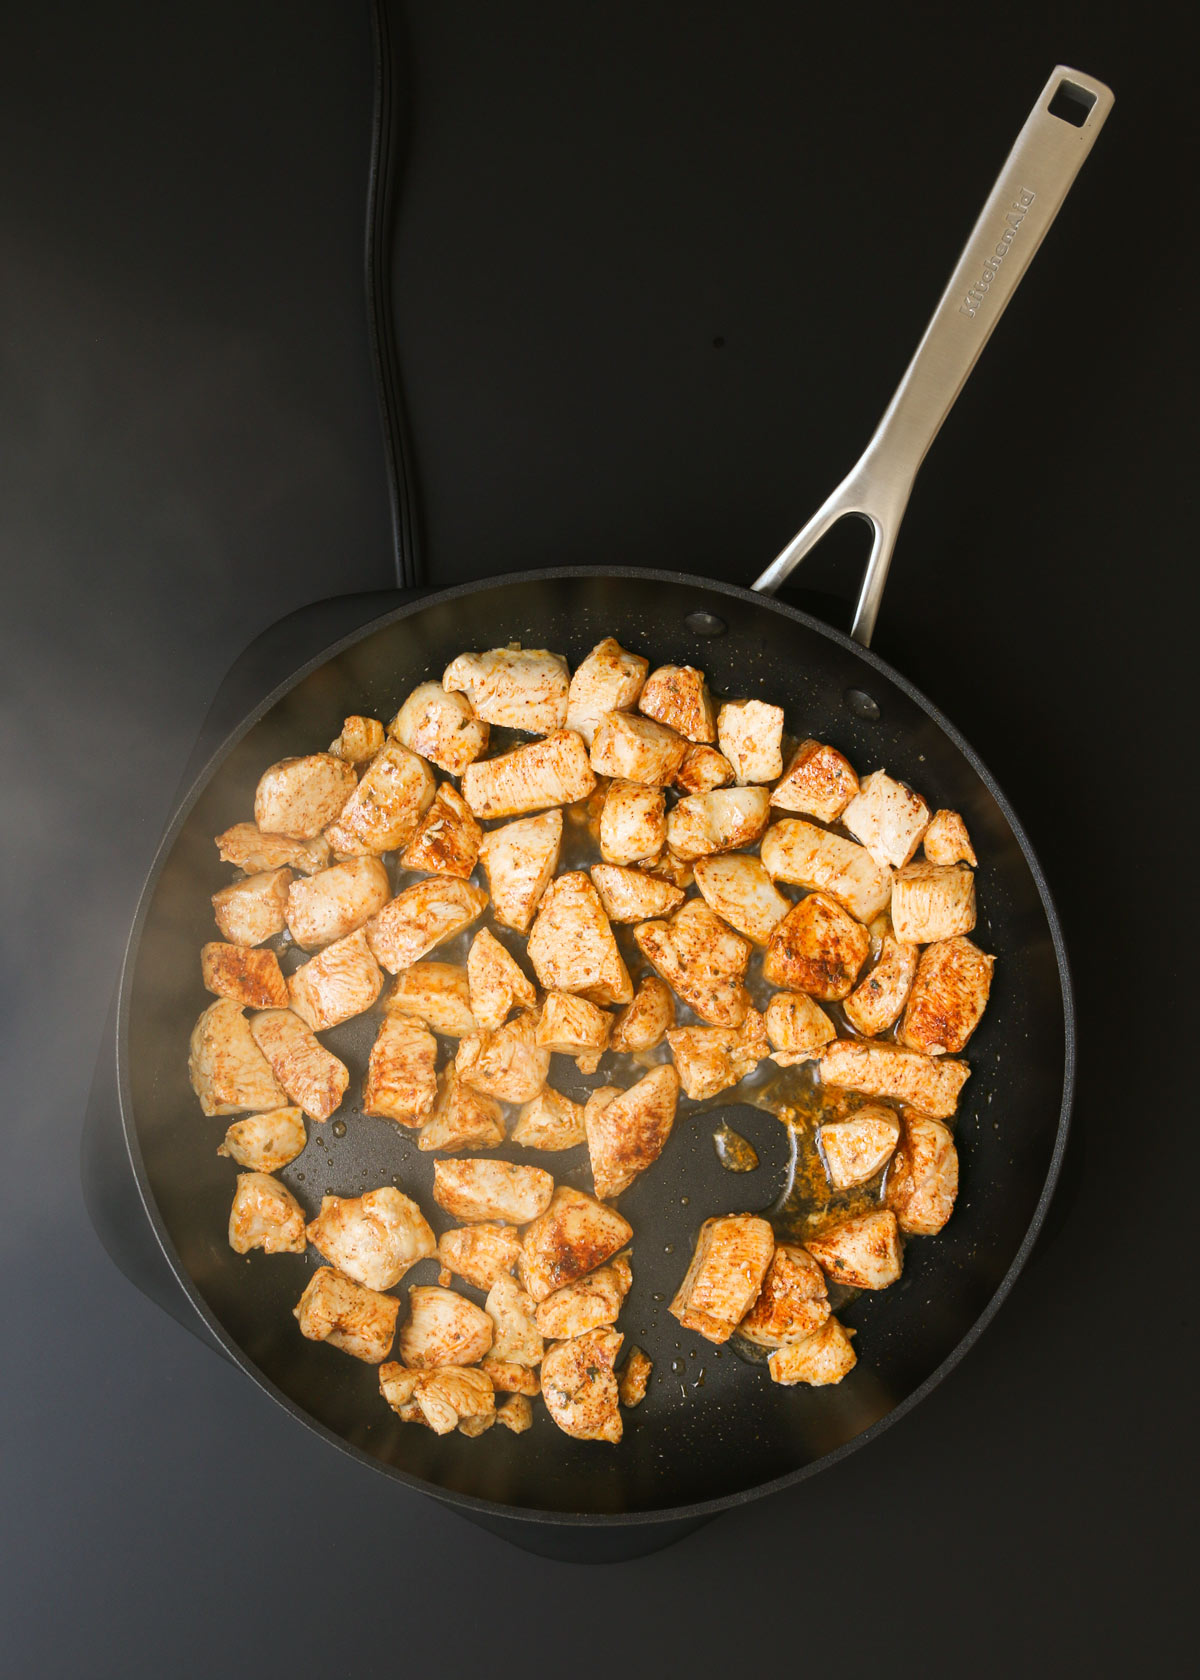 cooked chicken in skillet with steam rising.